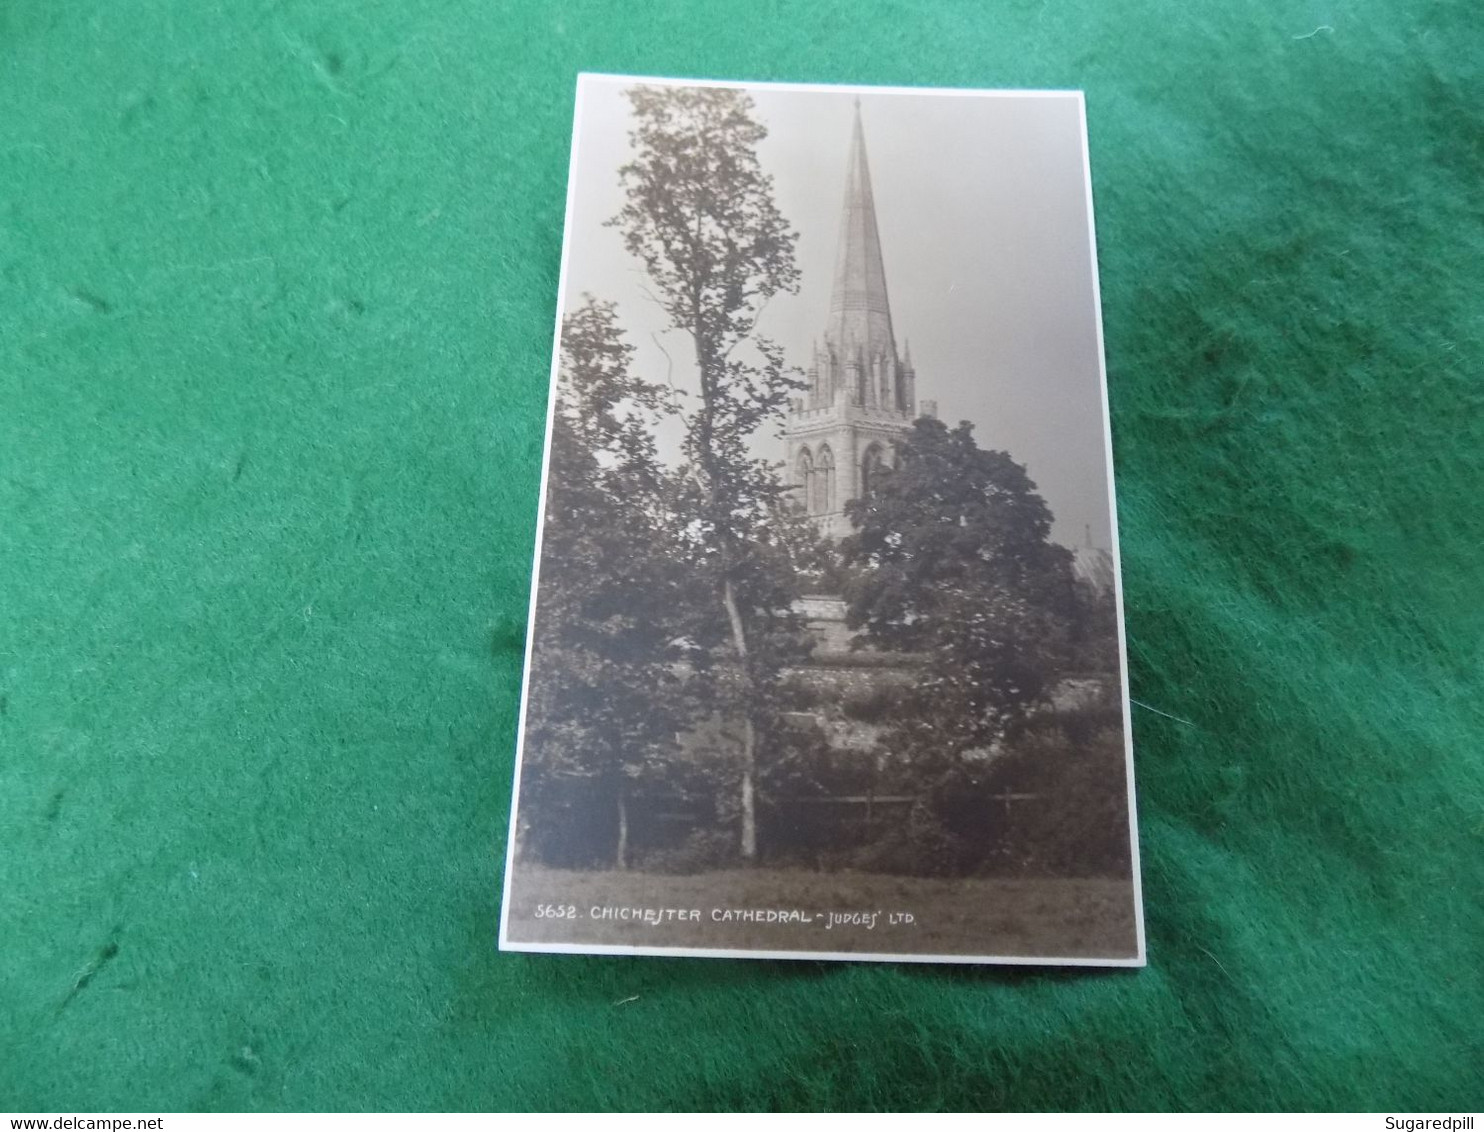 VINTAGE UK SUSSEX: CHICHESTER Cathedral Sepia Judges - Chichester